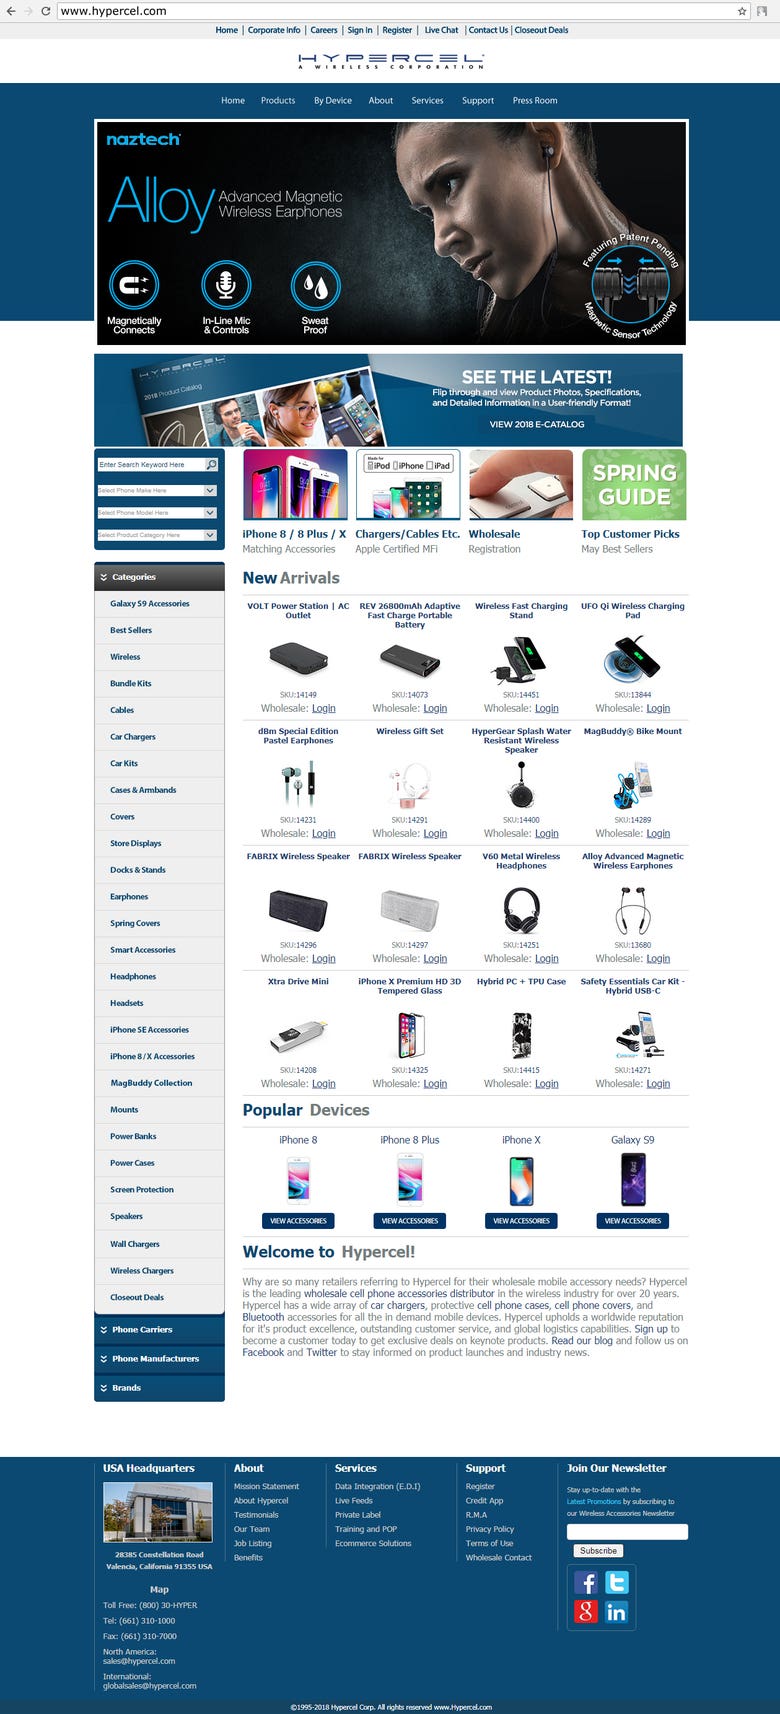 Mobile Accessories Store - PHP